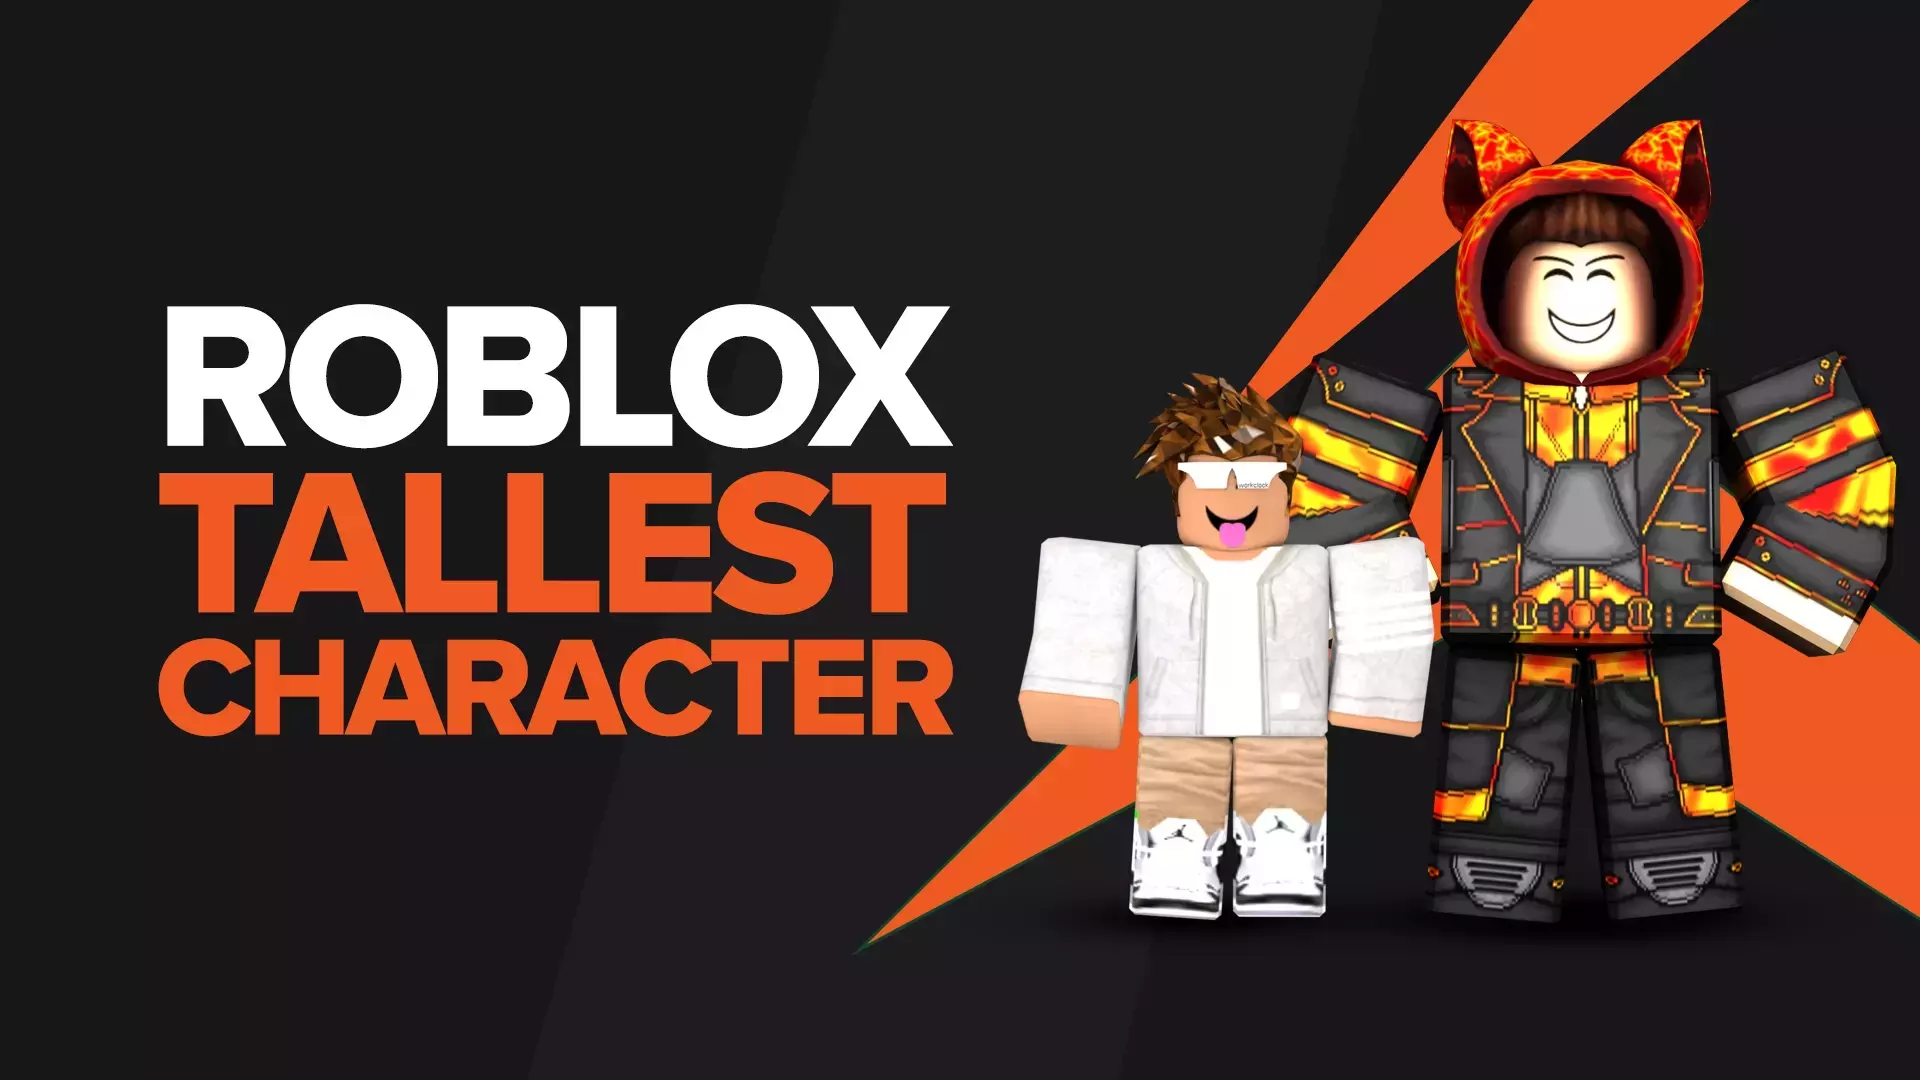 How to Make the Tallest Character In Roblox? What's the highest You can go?